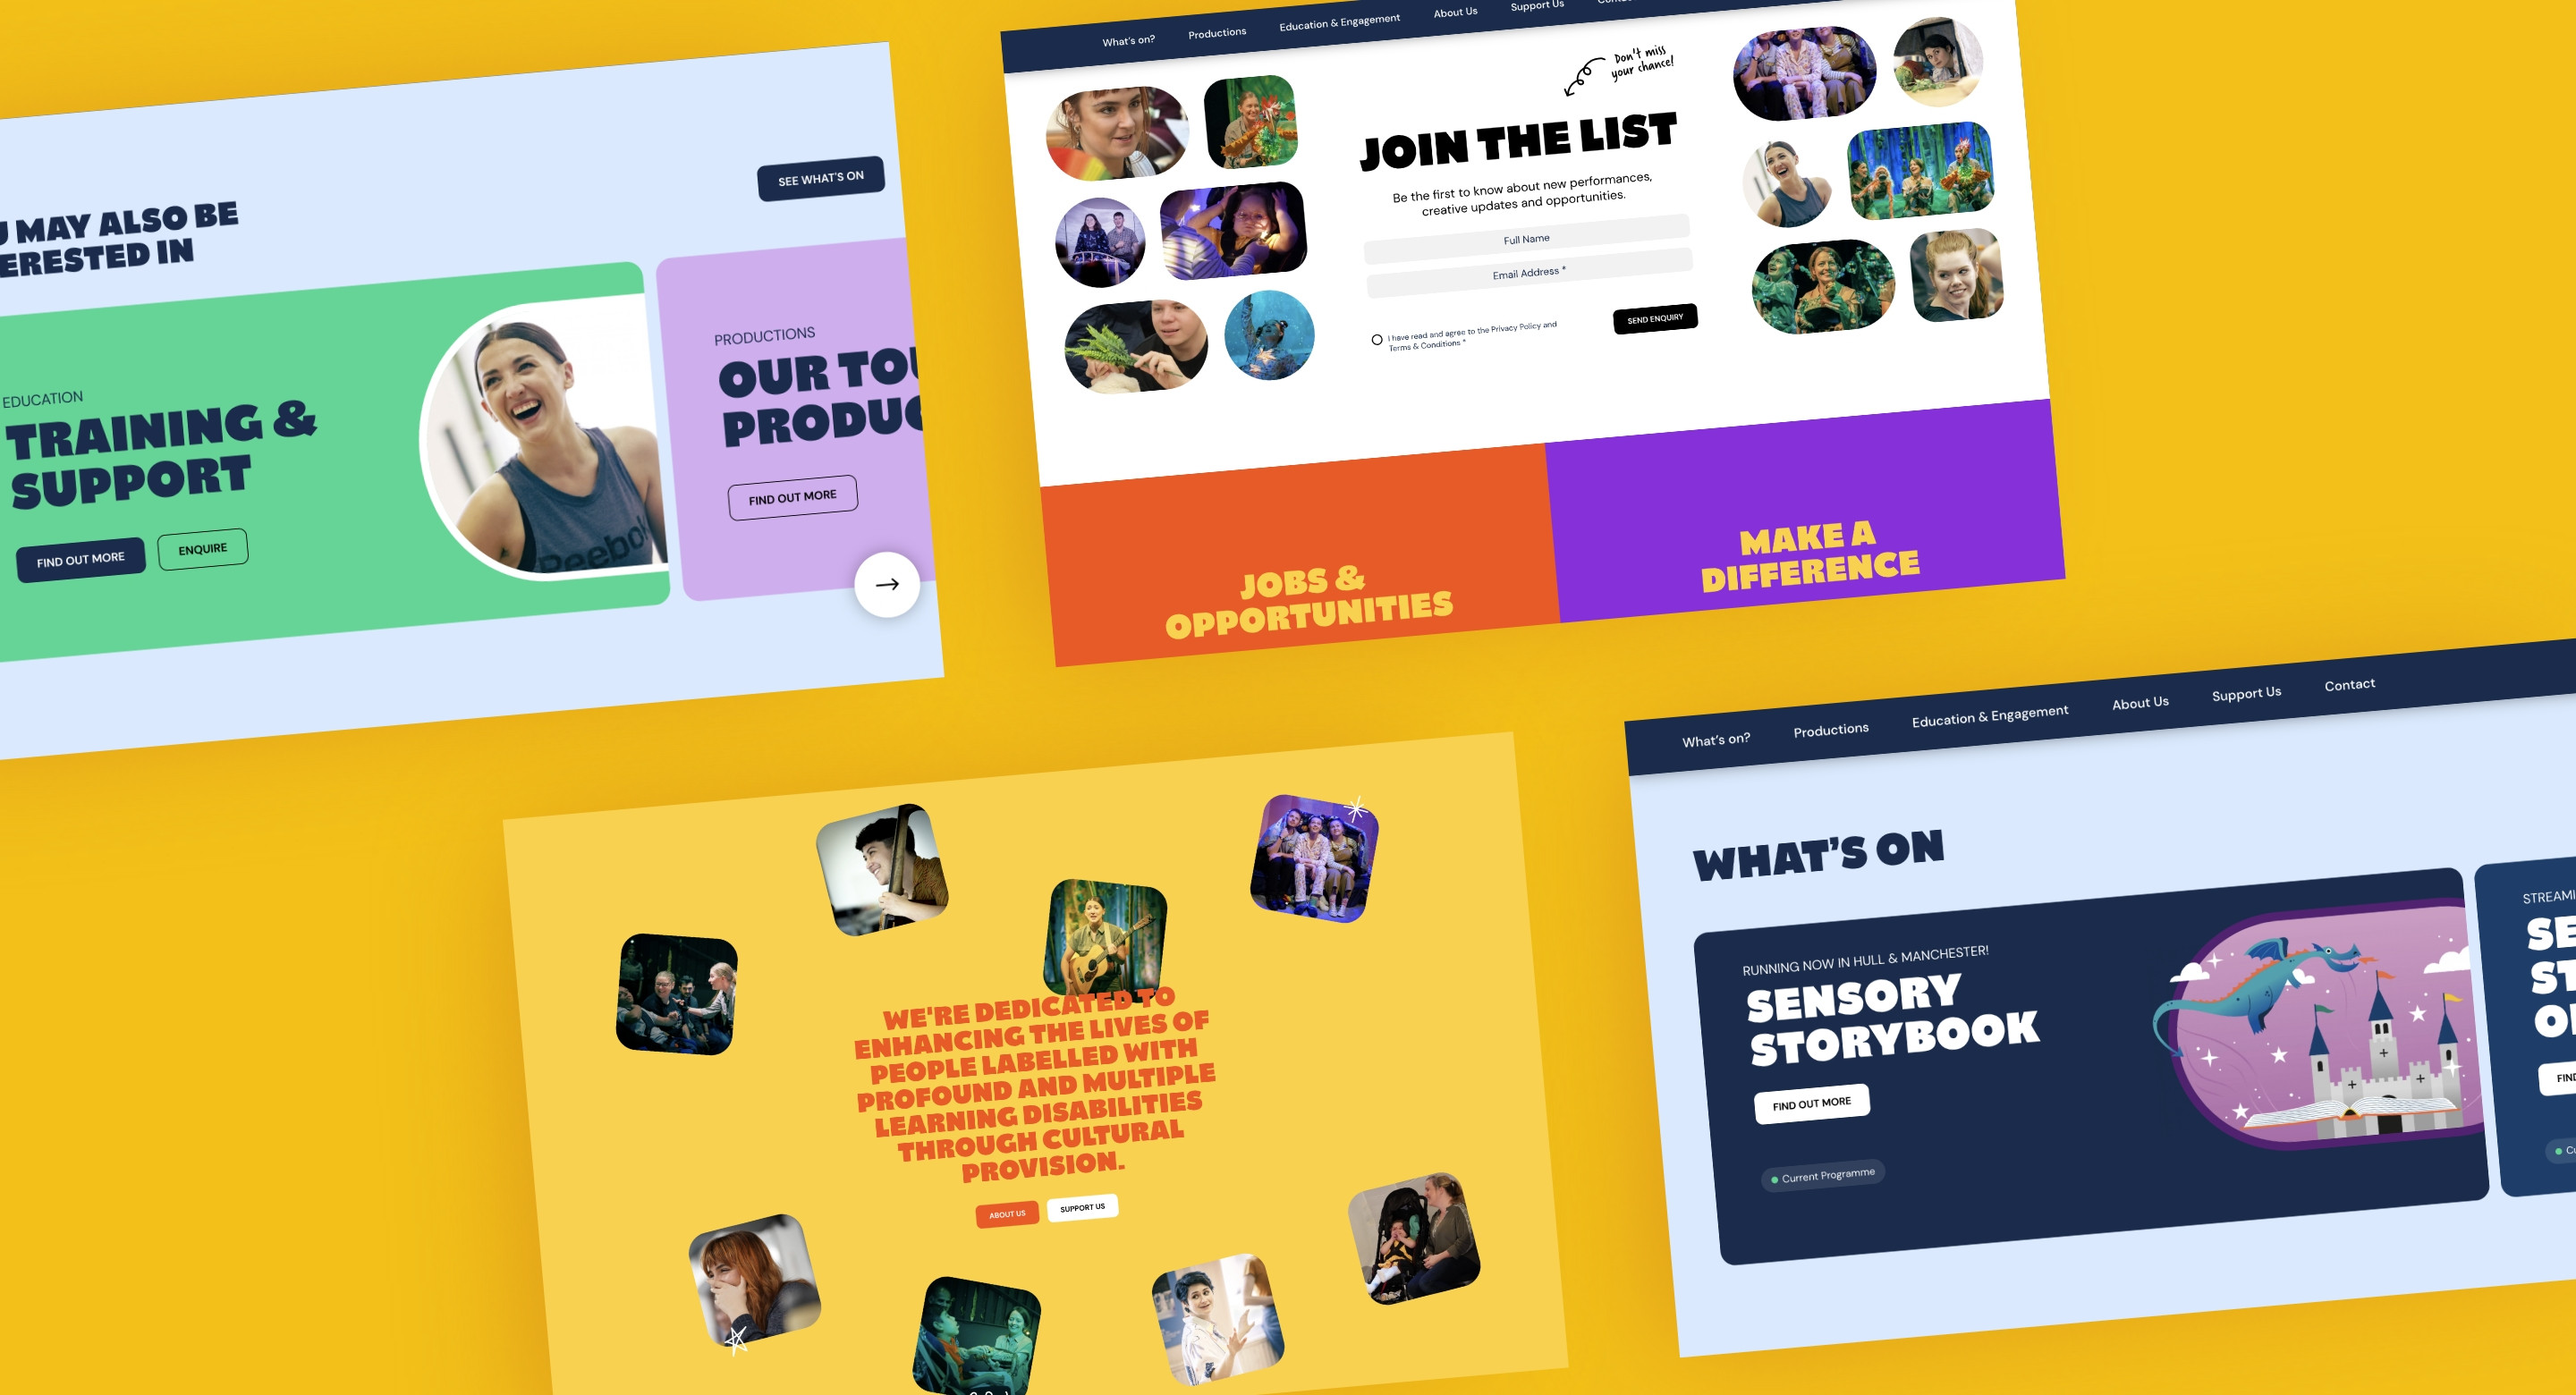 Concrete Youth not for profit charity website design by Root Studio